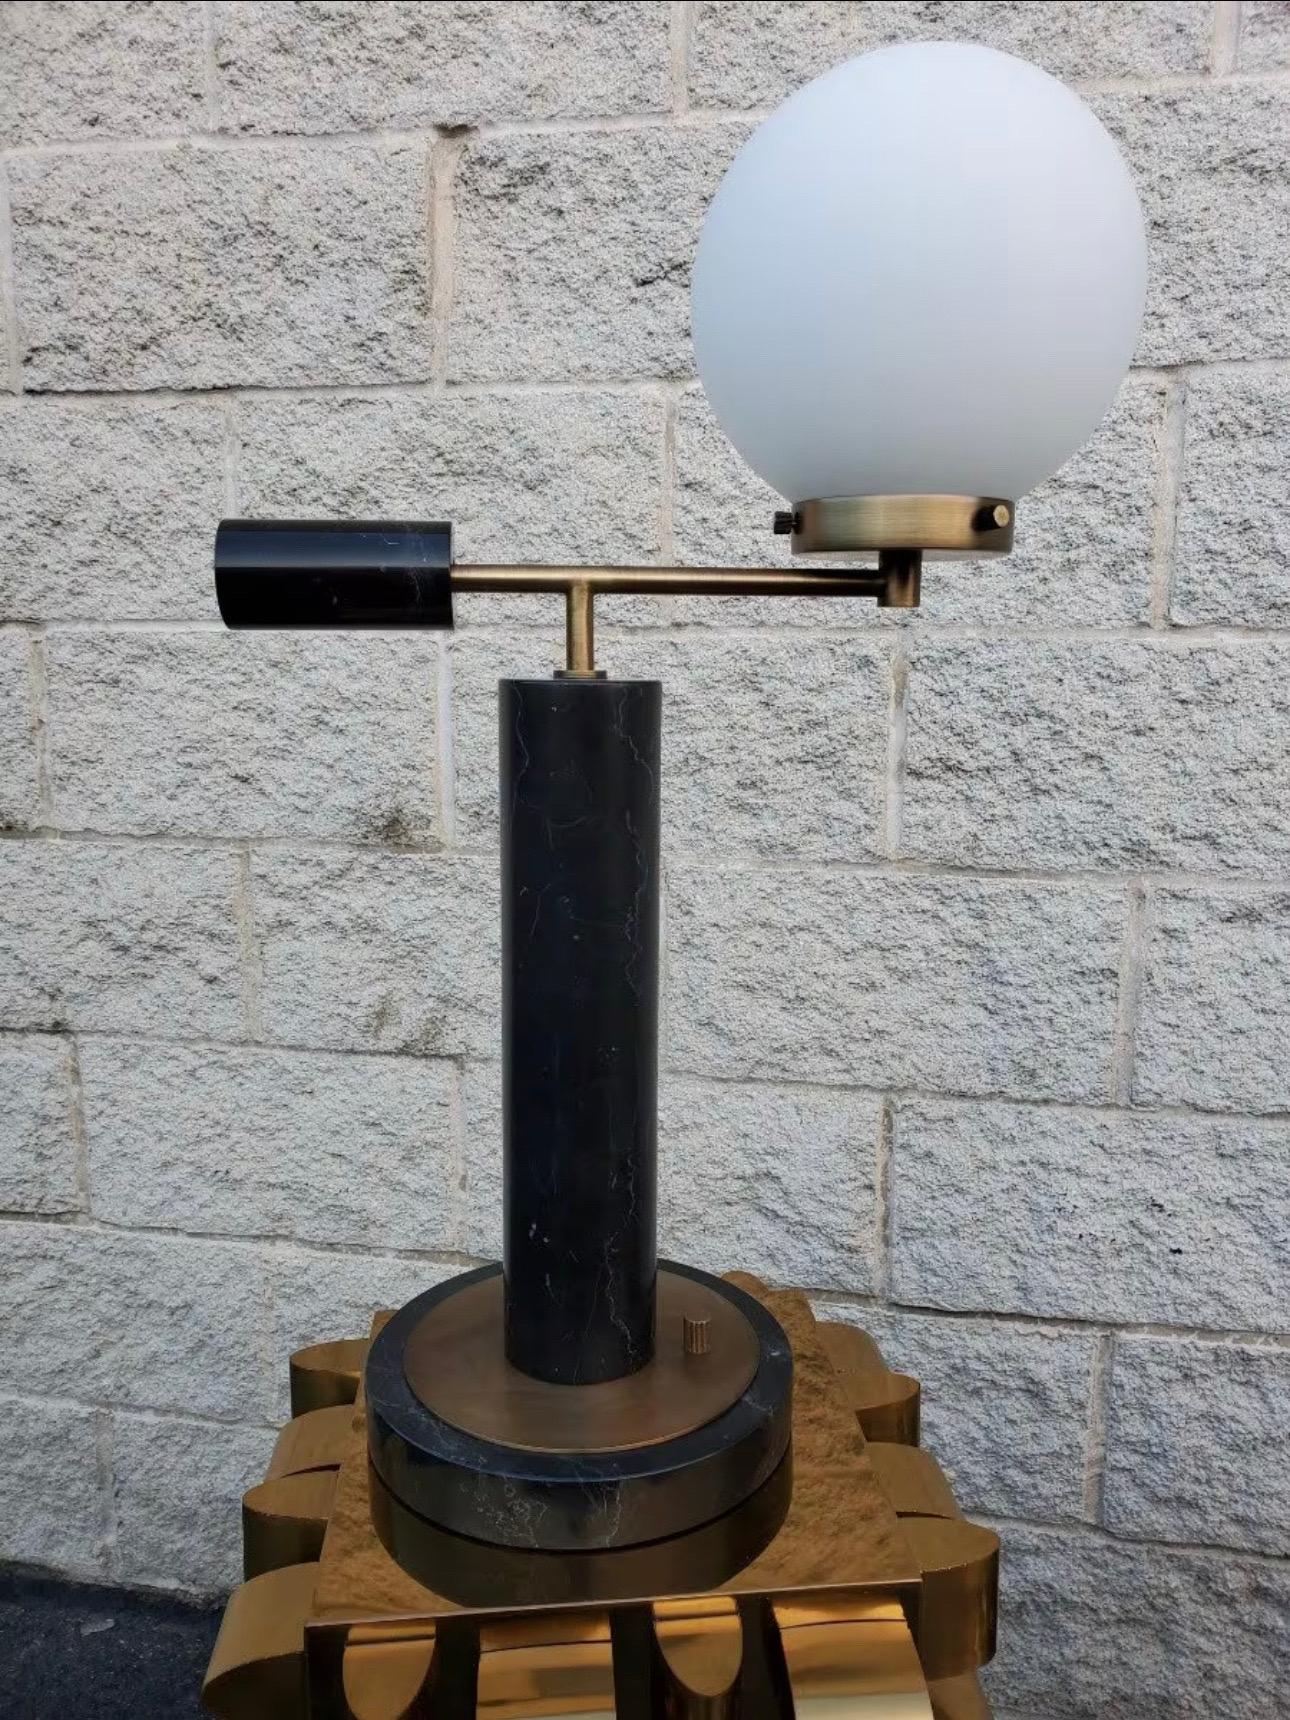 Modern Marble and Brass Table Lamps with White Ball Shade 

The lamp heavy. Works great. We also have a matching lamp with 2 white ball shades. 

Circa 2018

Dimensions 

H 25